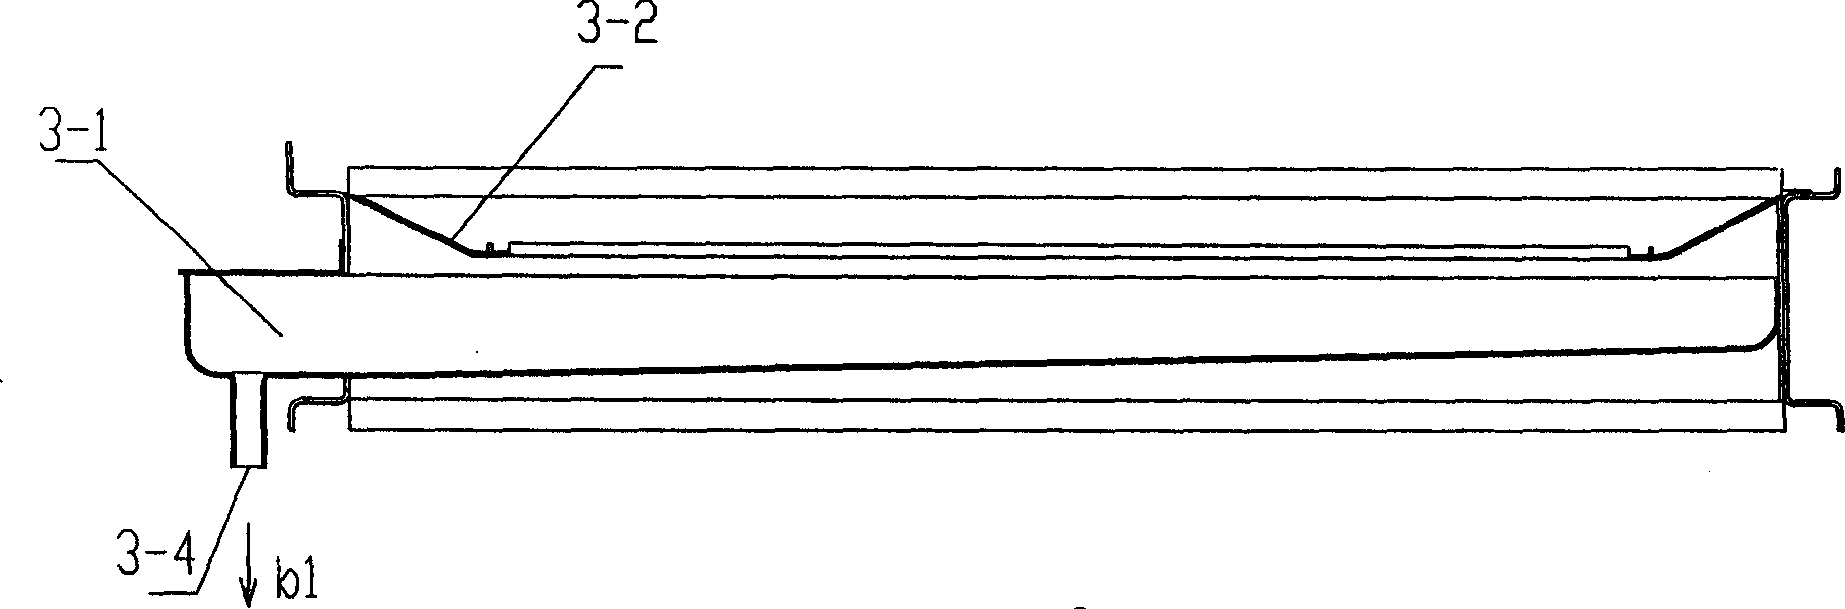 Condensing type water heater condensate water collecting device